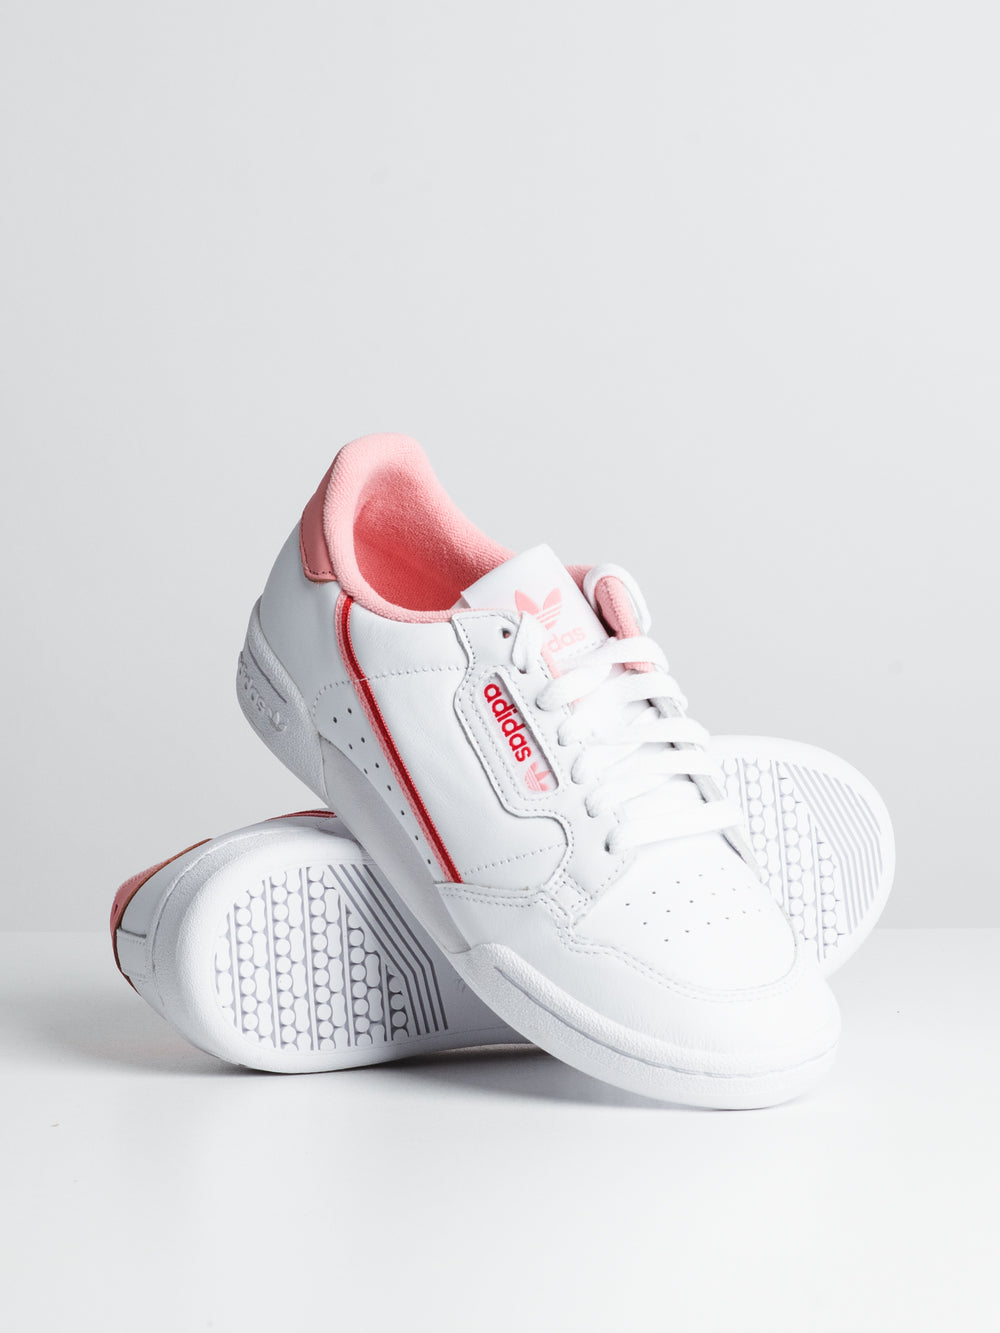 WOMENS CONTINENTAL 80 - WHT/PNK/RED - CLEARANCE